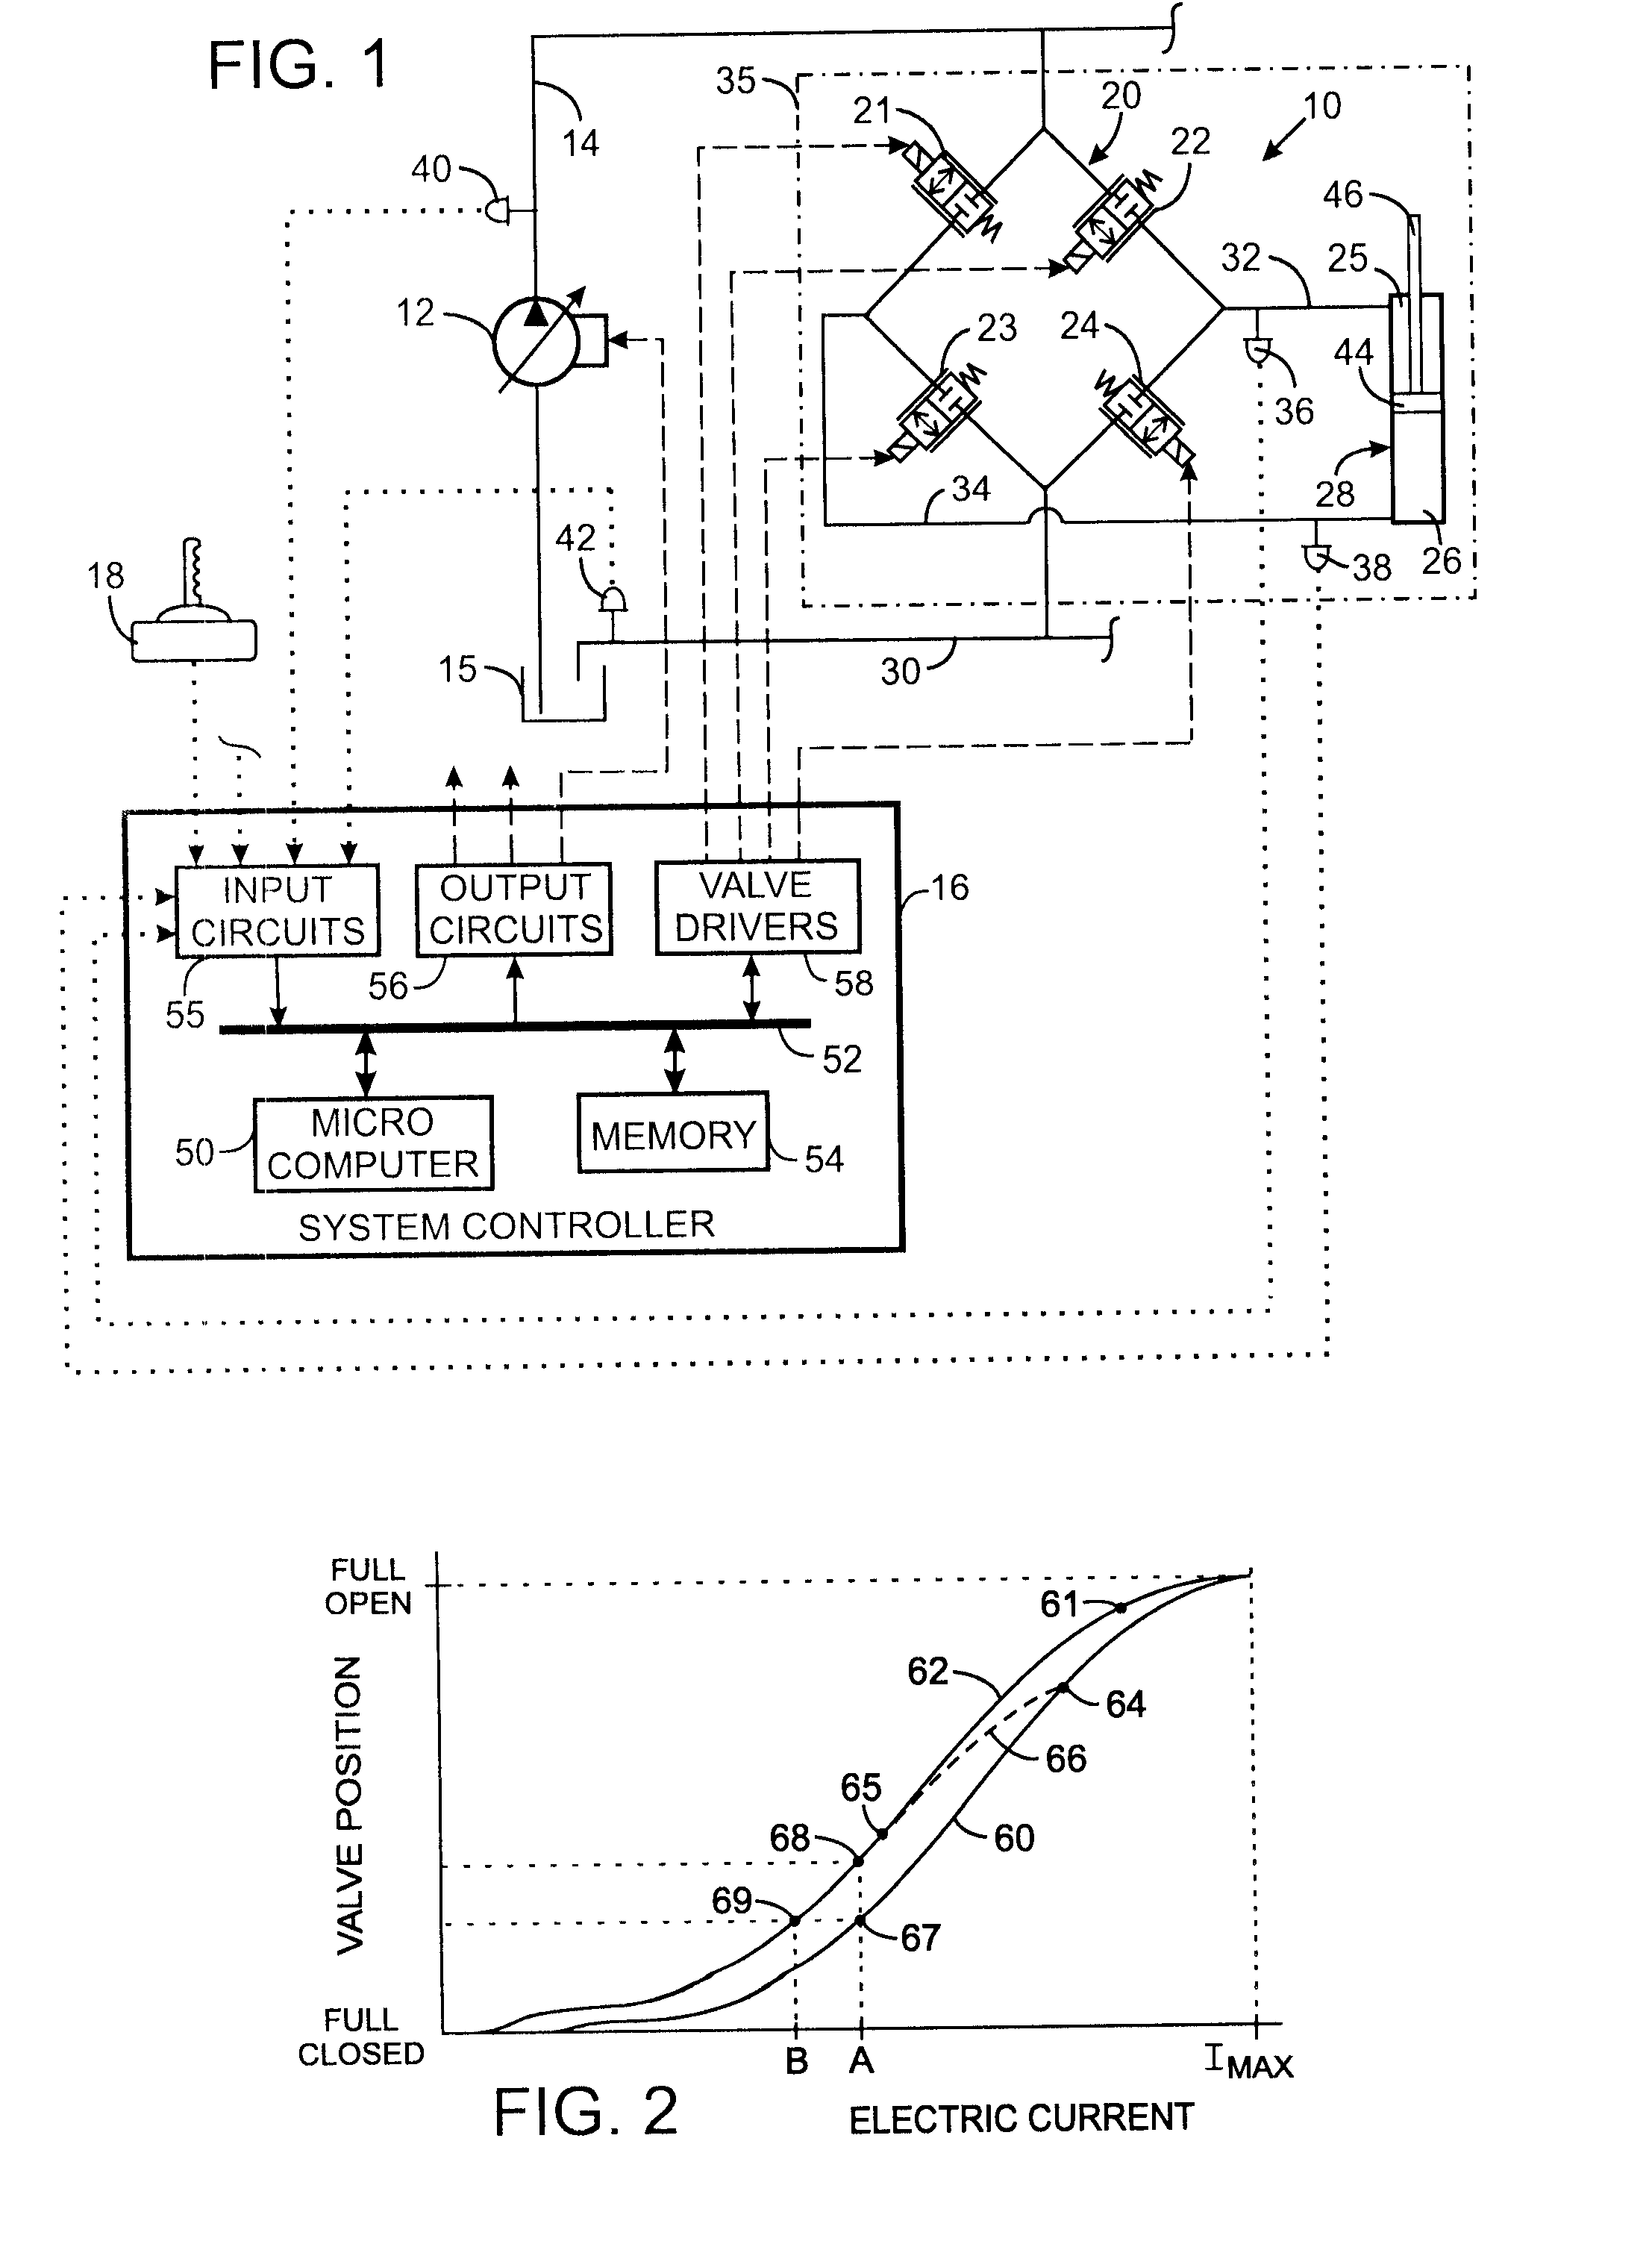 Electrohydraulic Valve Control Circuit With Magnetic Hysteresis Compensation